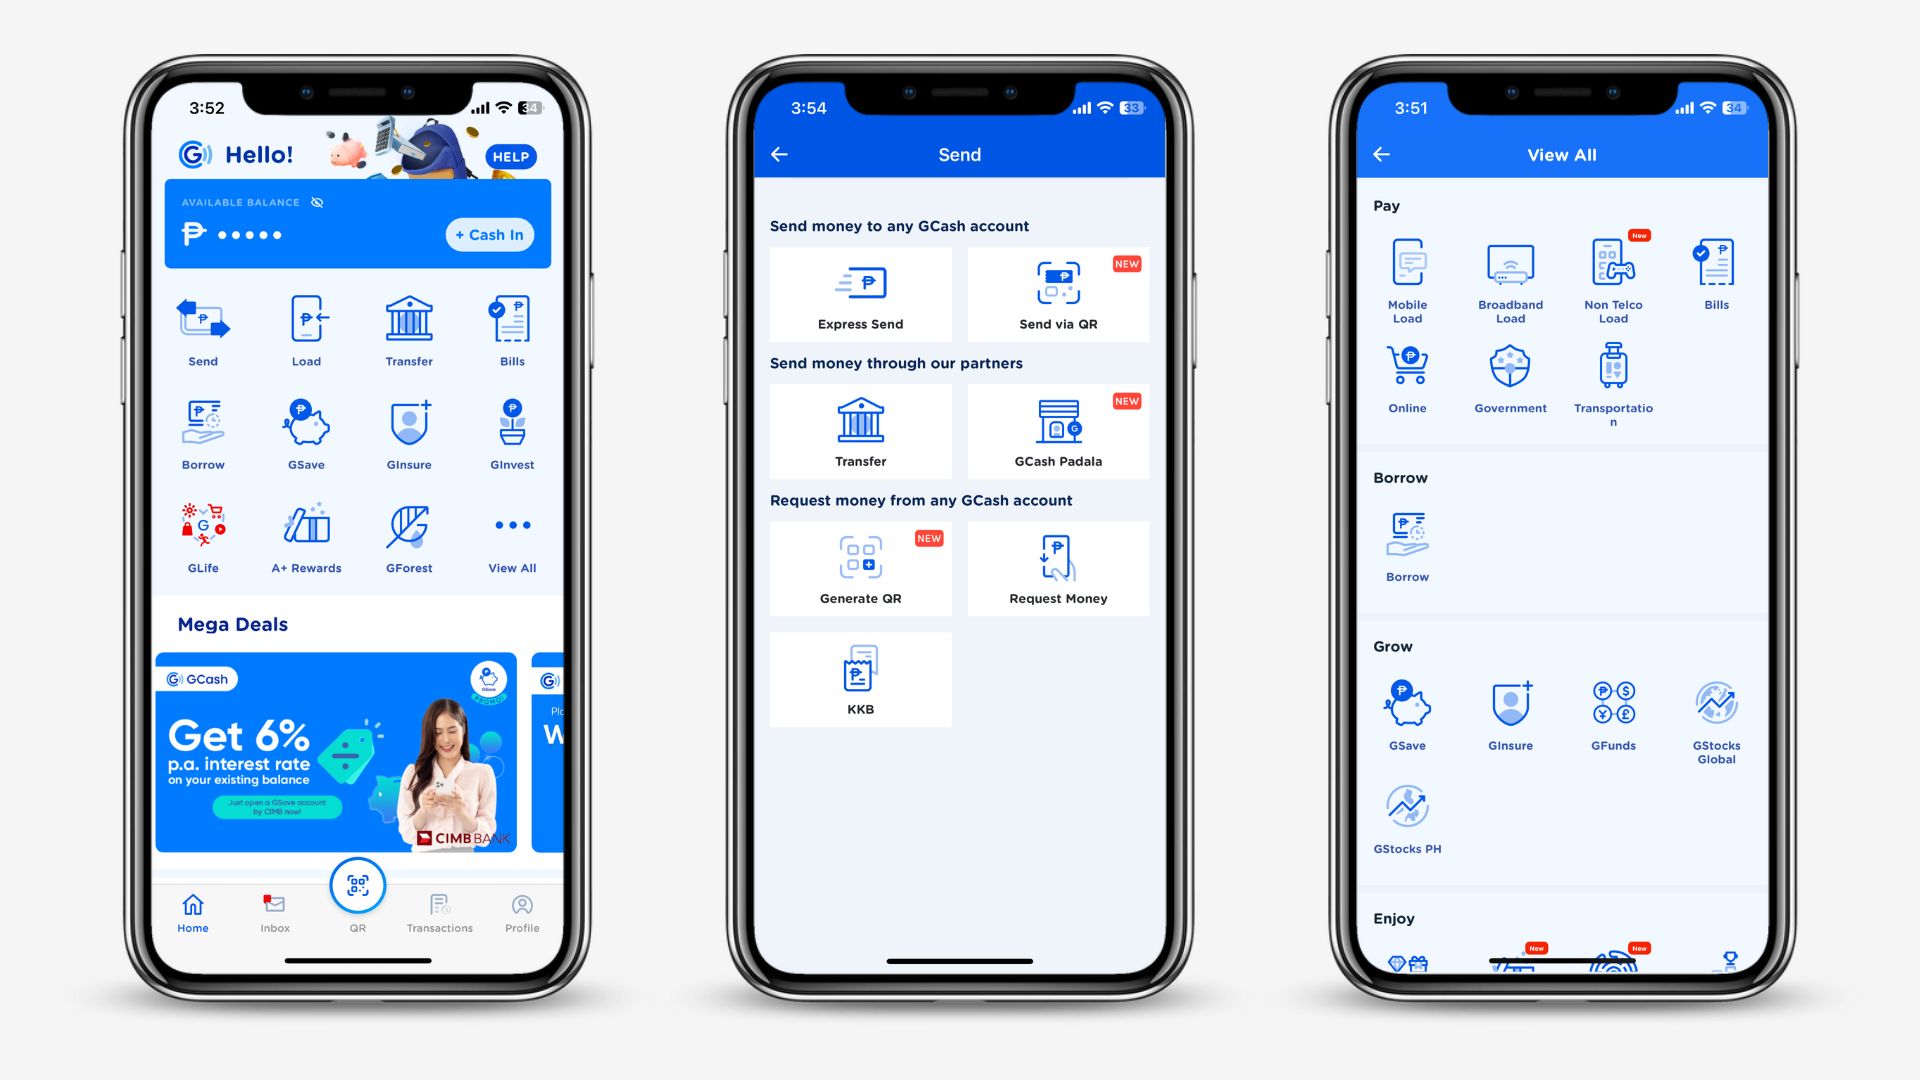 Screenshots of the GCash app showing the available products and services on the app.